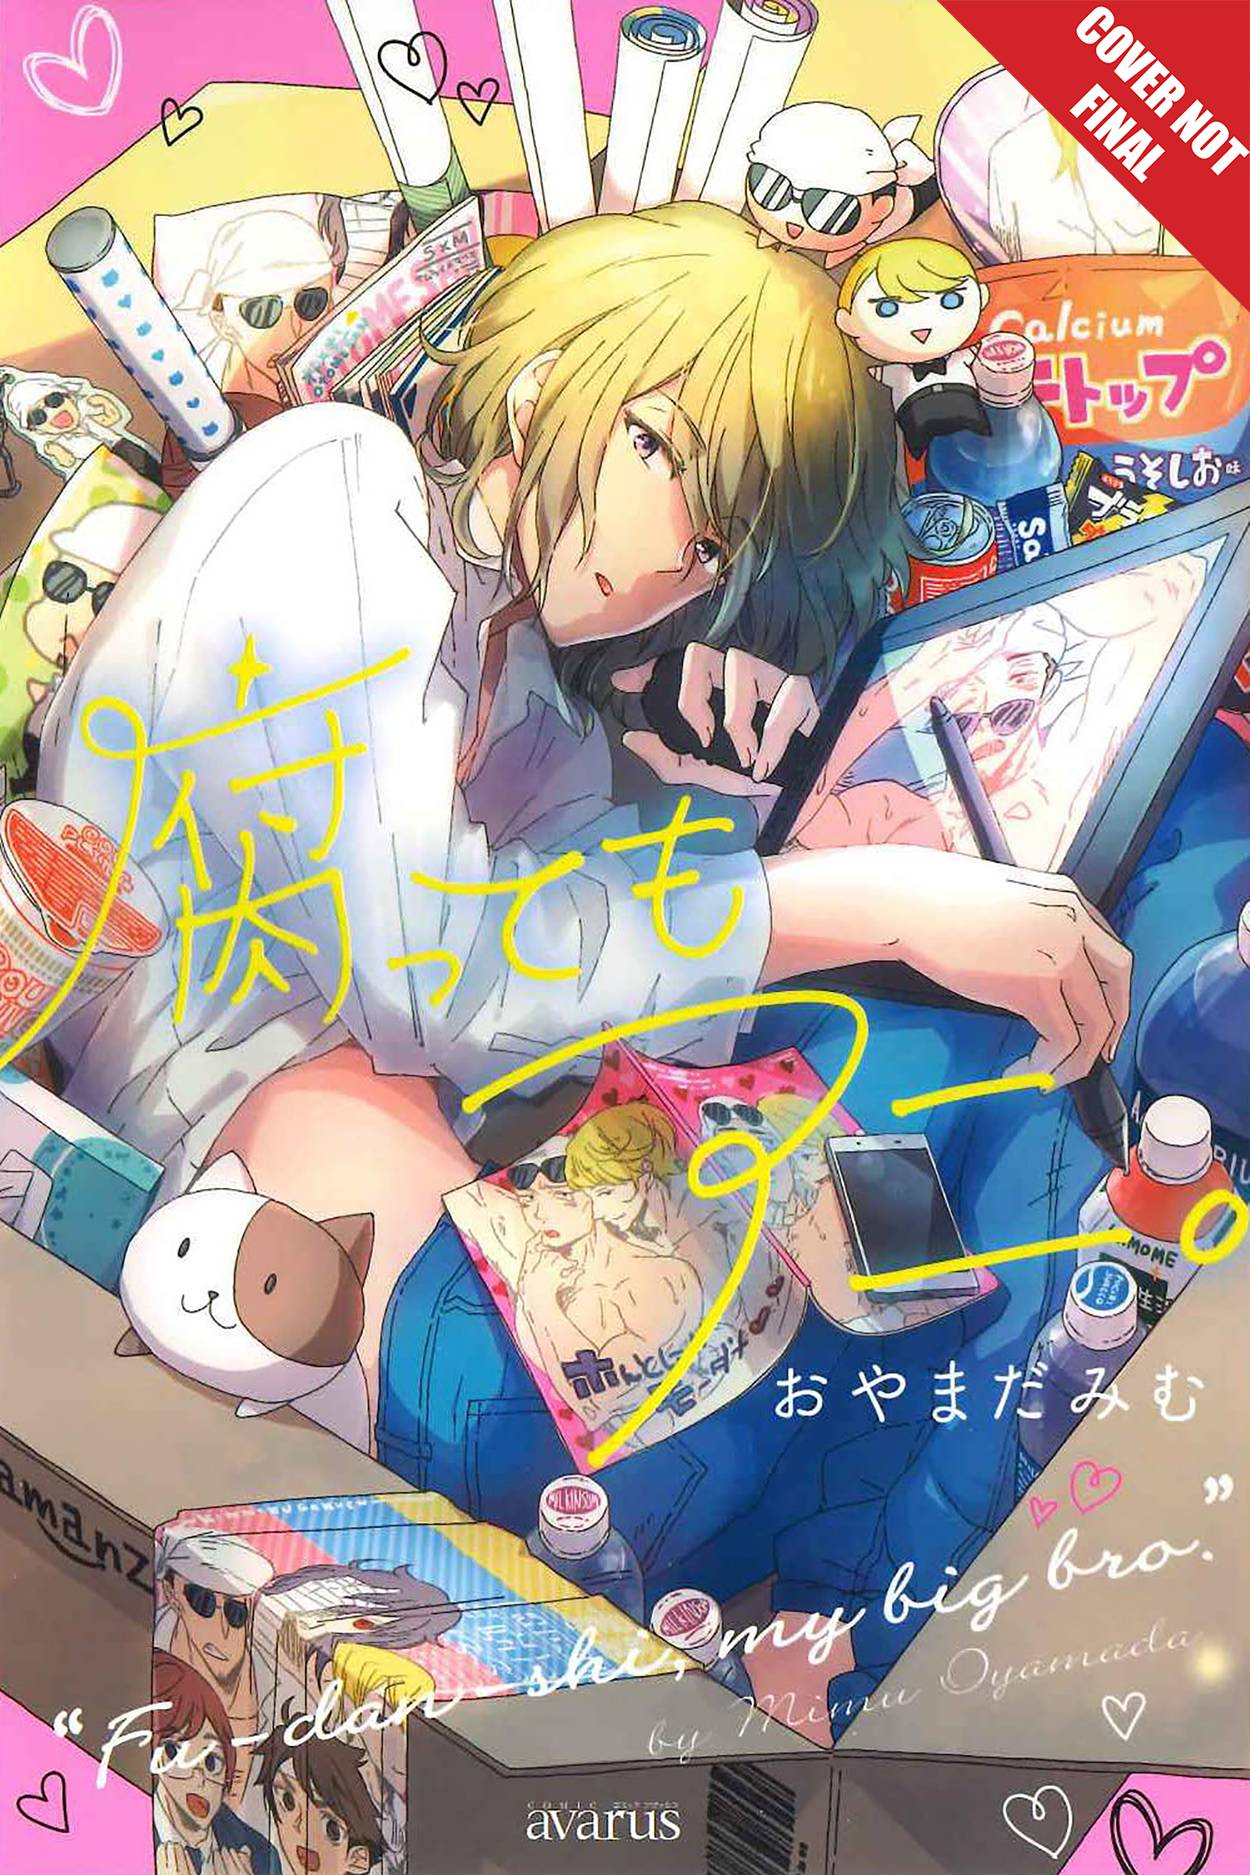 An androgynous young person with shoulderlength blond hair has their knees curled up towards their chest, cradling a computer tablet with a shirtless man drawn on. Around them are a variety of posters and plushes, as well as some drinks and cup noodles.